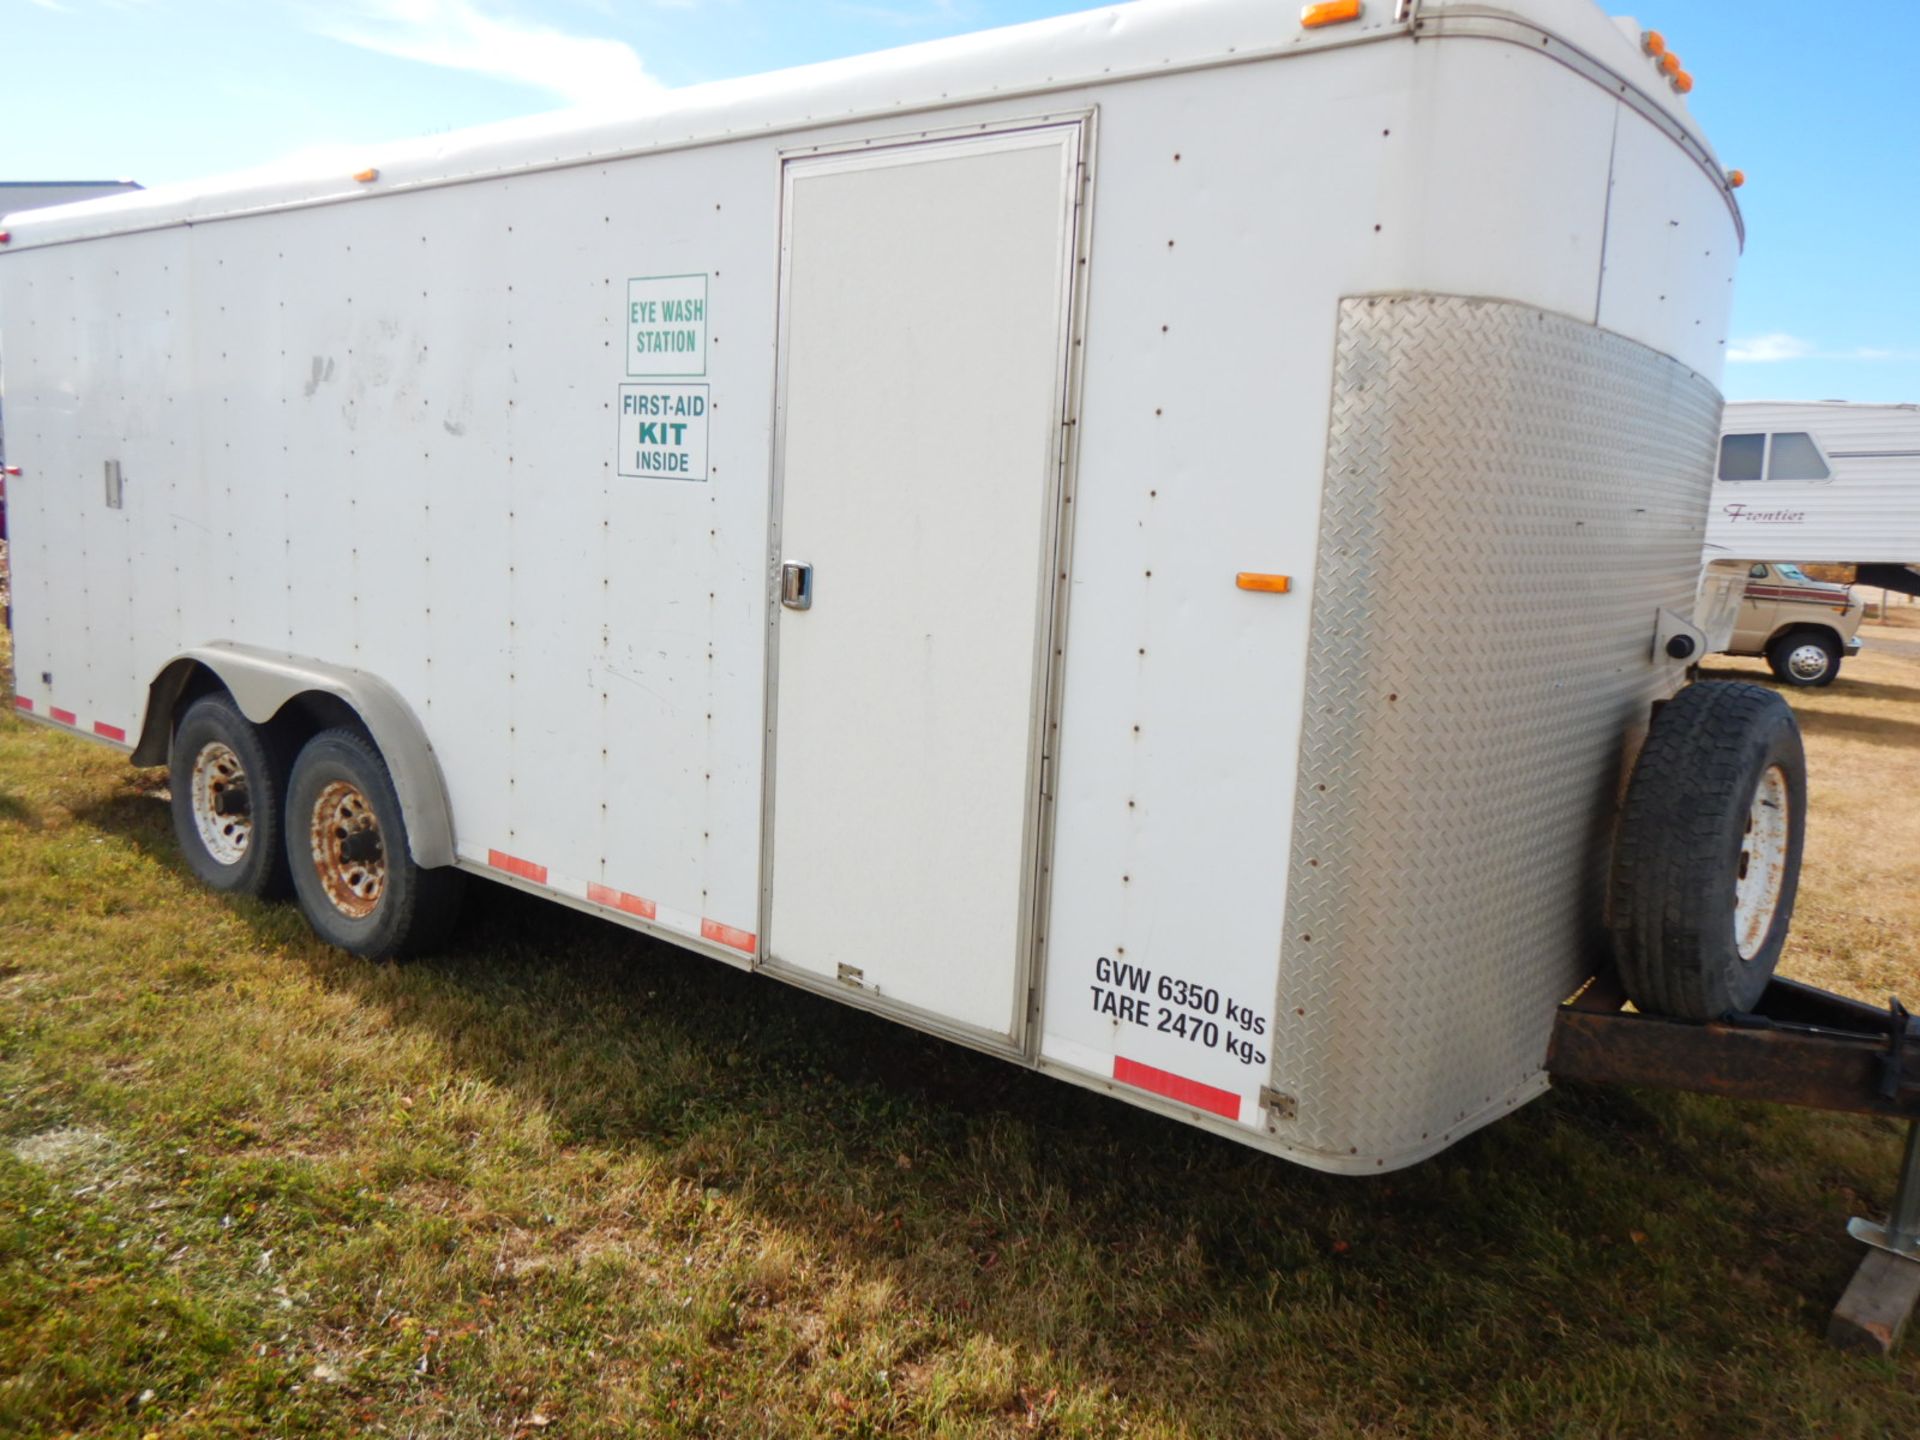 2004 20FTX8FT ENCLOSED TRAILER, T/A, GVWR 6350KG, BARN DOORS, S/N FC200418 - Image 2 of 6